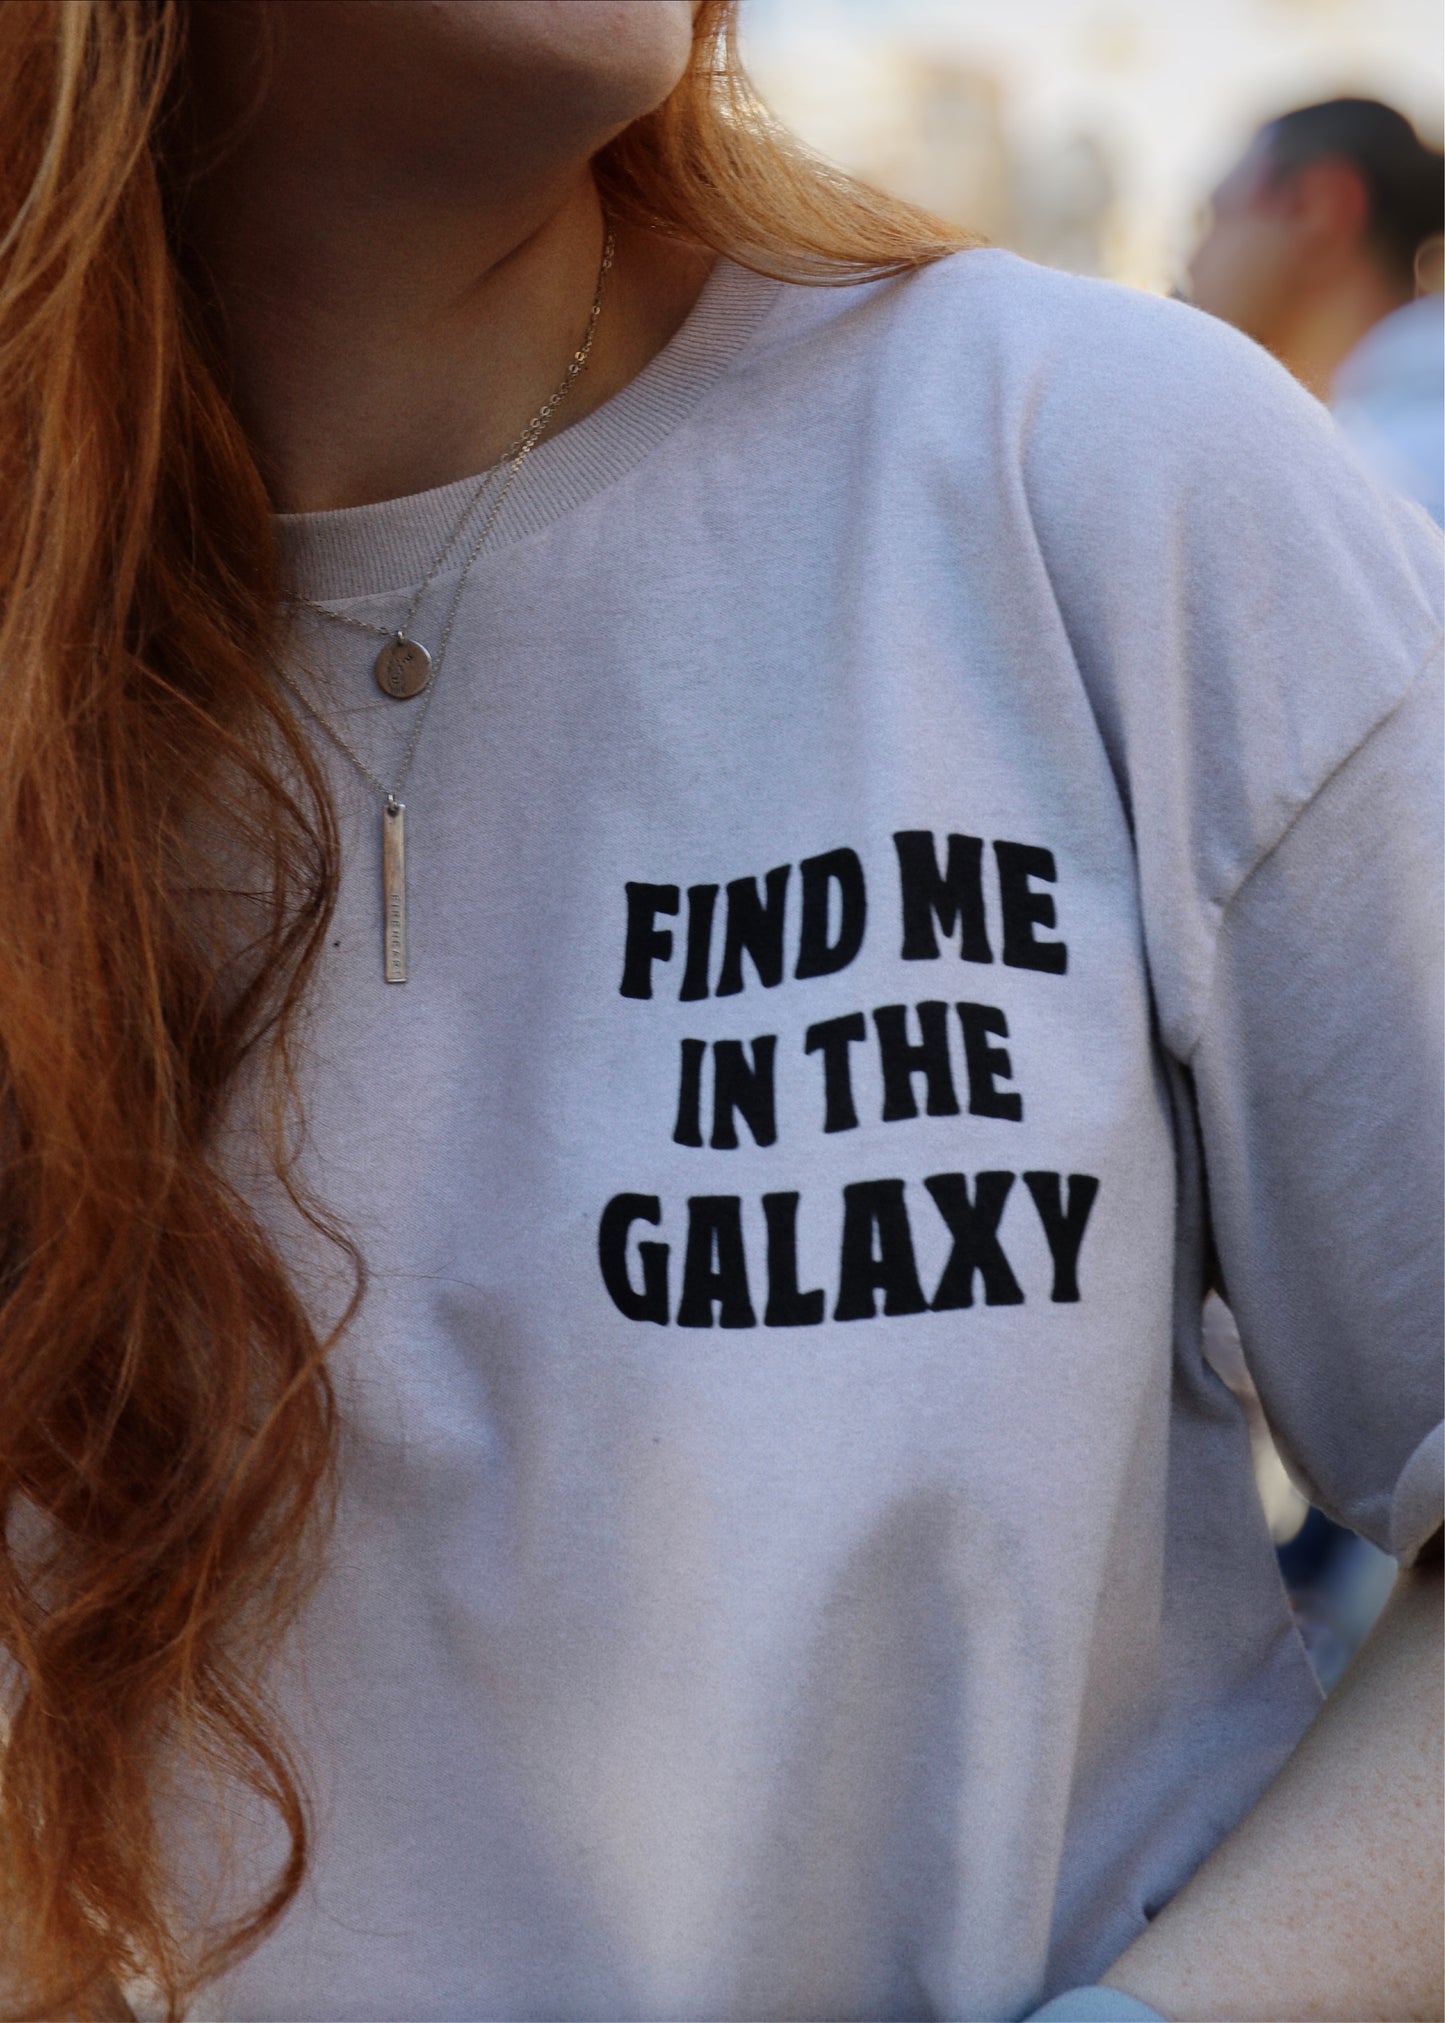 Find me in the galaxy tee